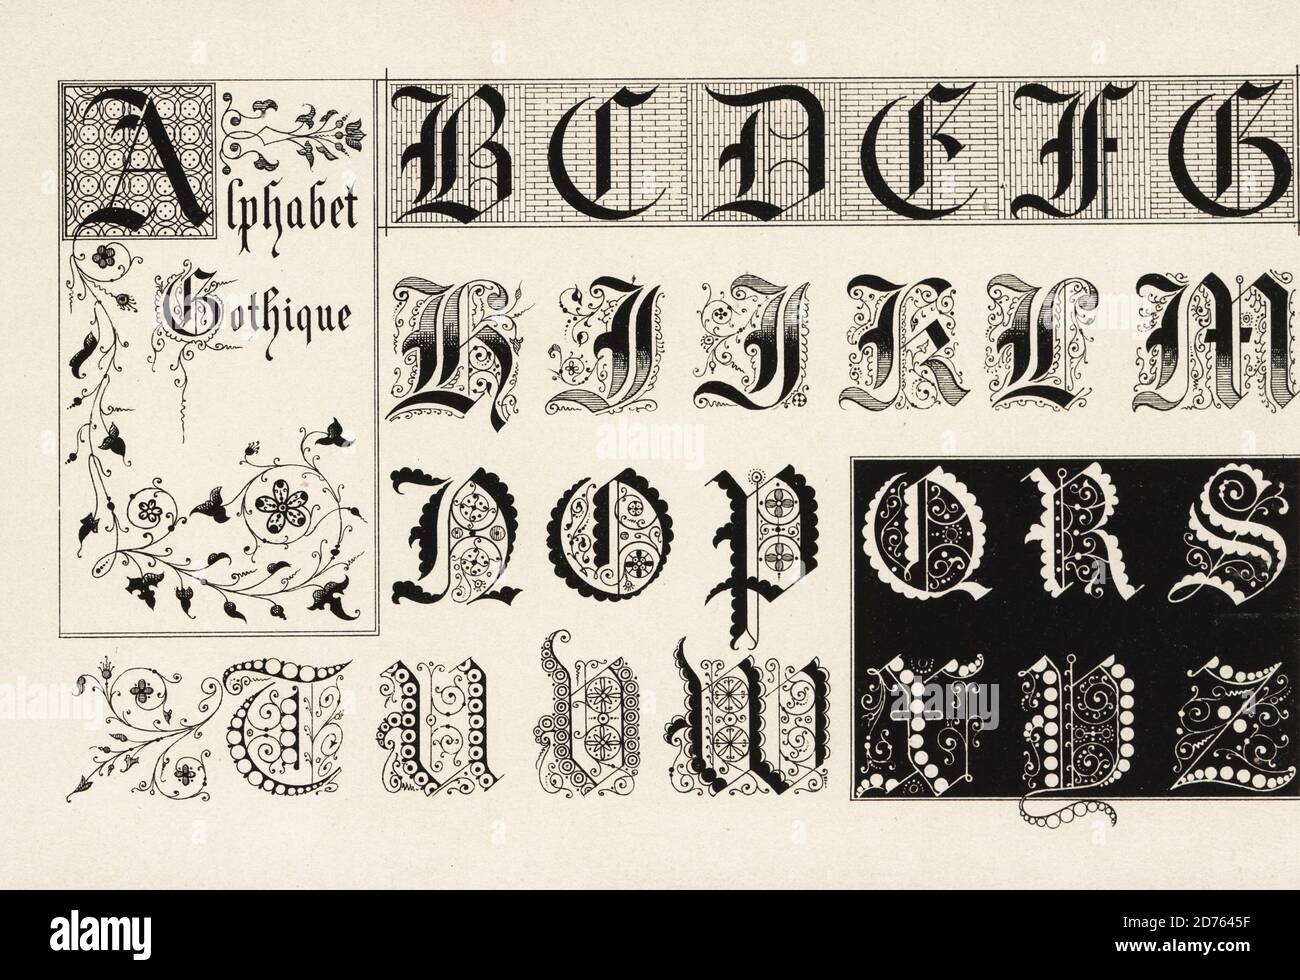 Initial letters from a Gothic alphabet. Alphabet Gothique. Chromolithograph designed and lithographed by Ernst Guillot from his Ornementation des Manuscrits au Moyen-Age (Ornamentation from Manuscripts of the Middle Ages), Paris, 1897. Stock Photo